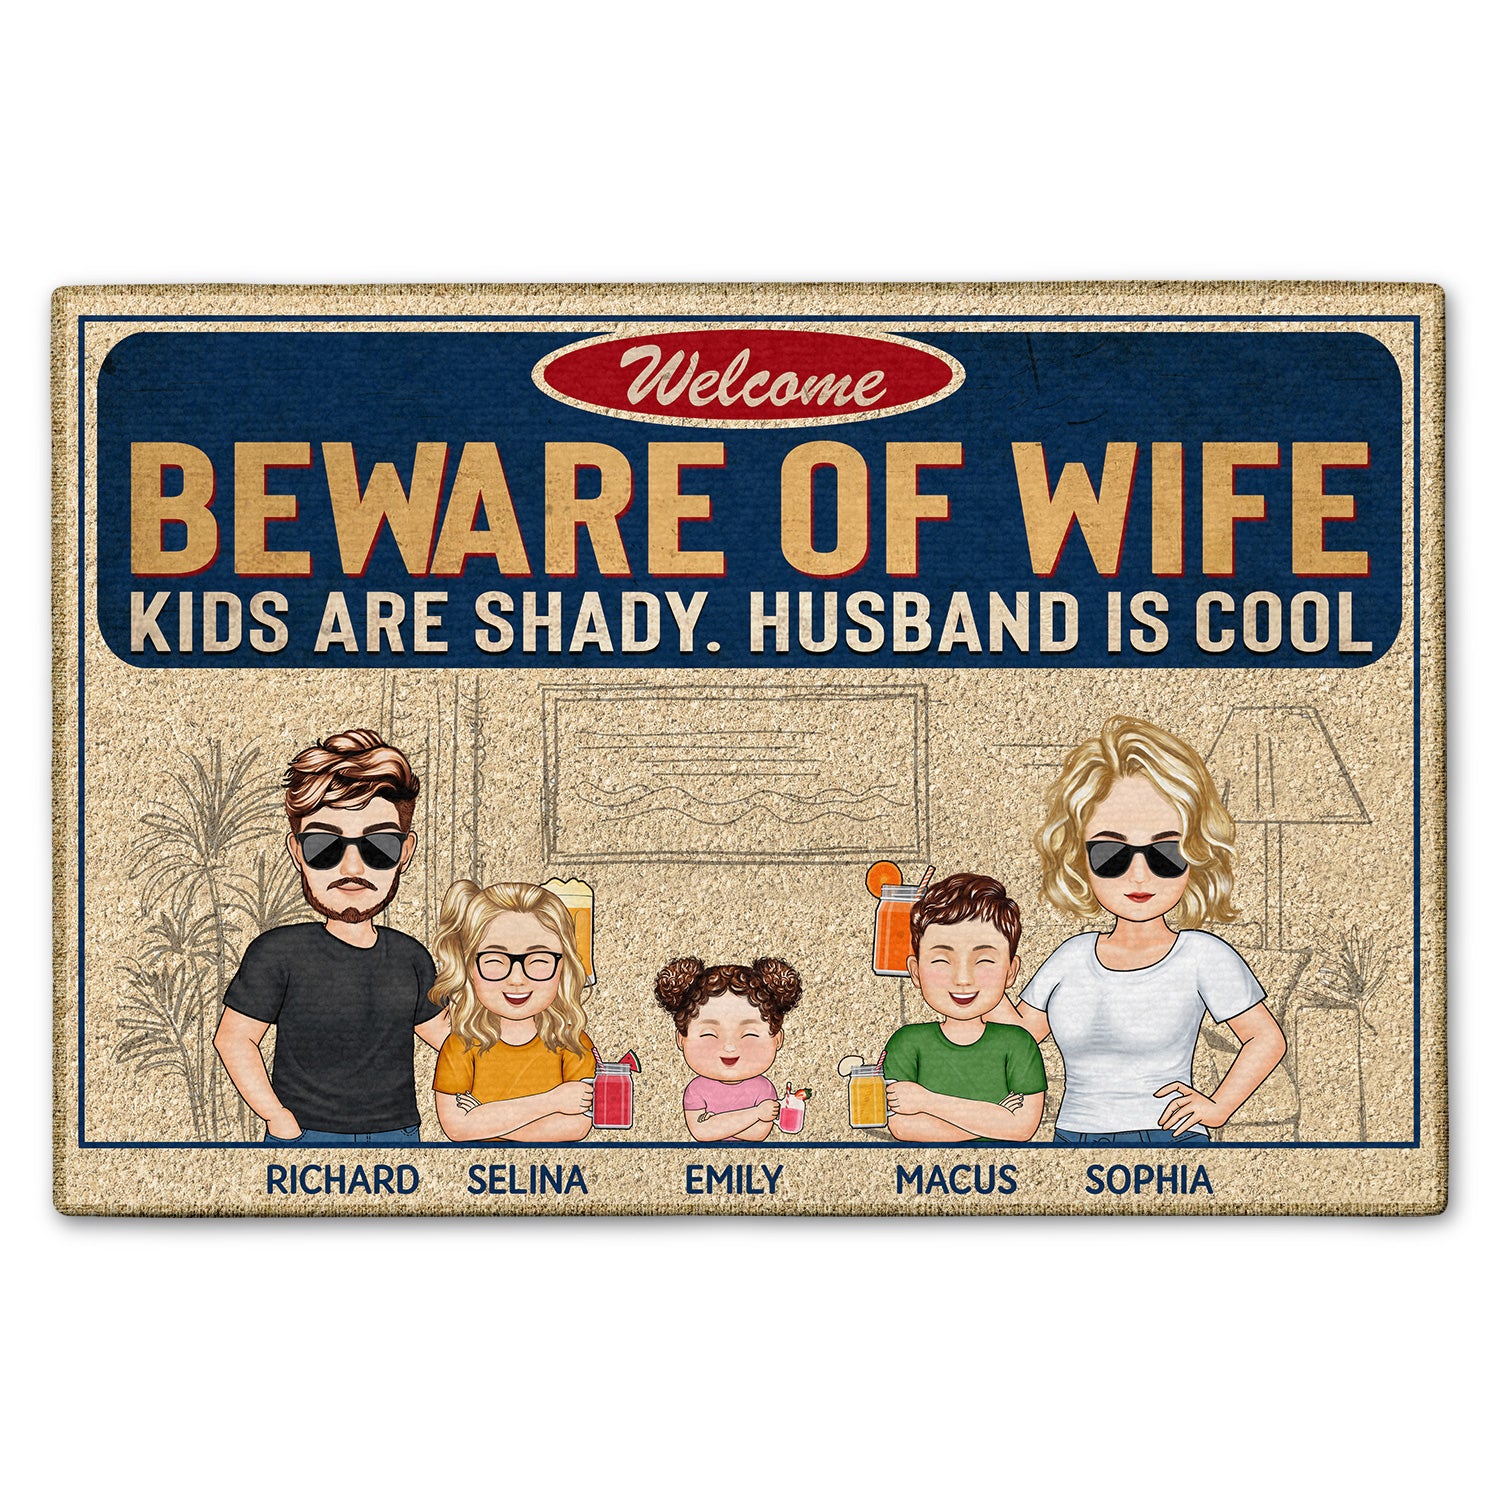 Beware Of Wife Kids Are Shady Husband Is Cool Cartoon Couple Husband Wife Family - Personalized Custom Doormat